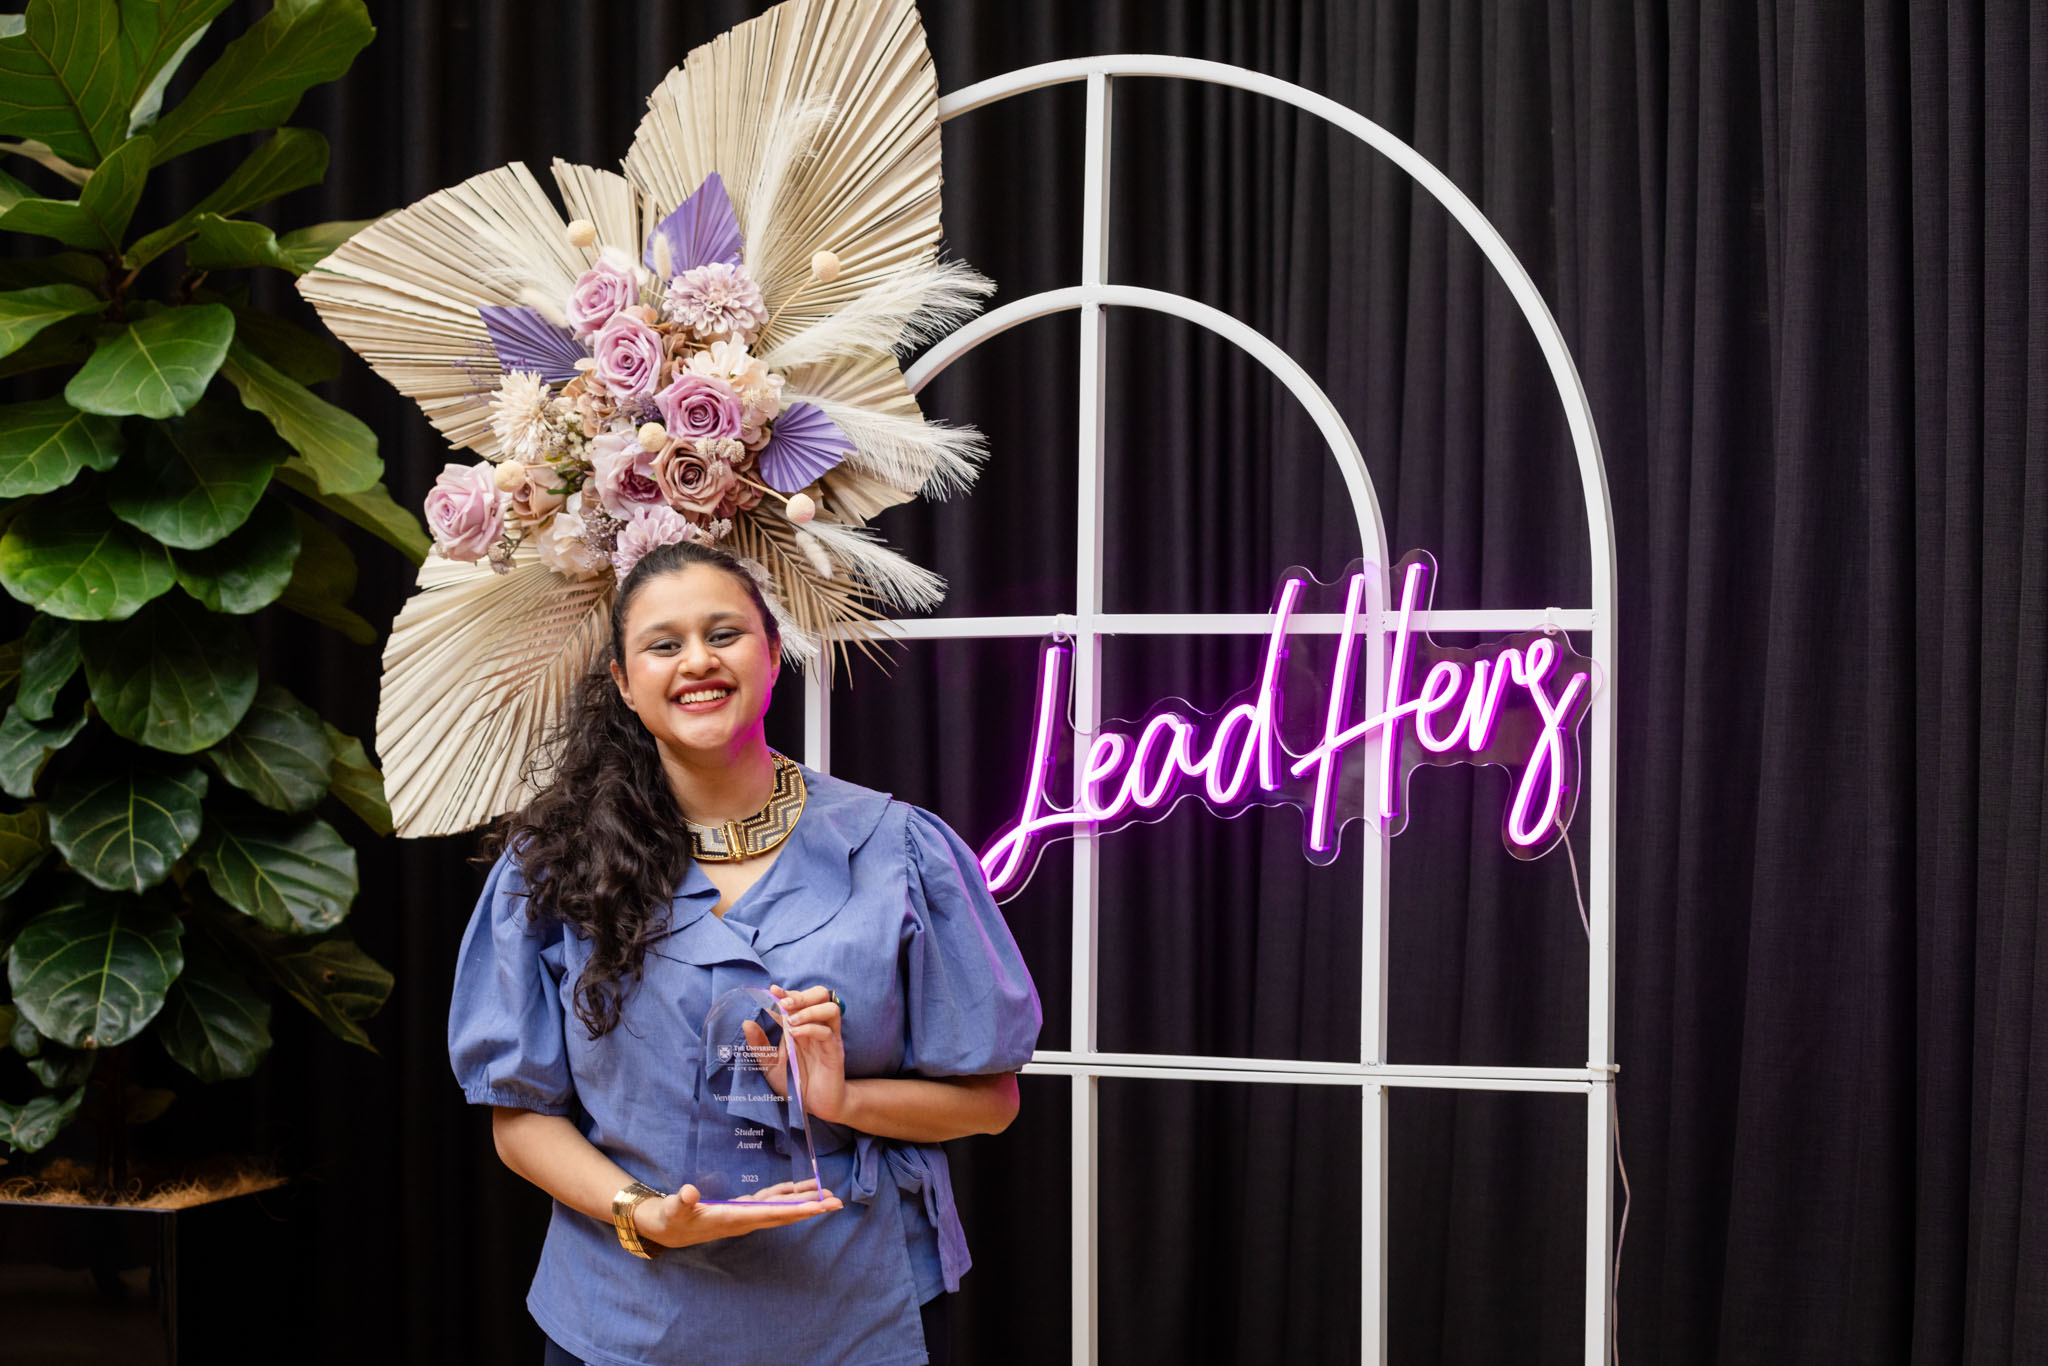 Hemanshi standing in front of a LeadHers neon sign